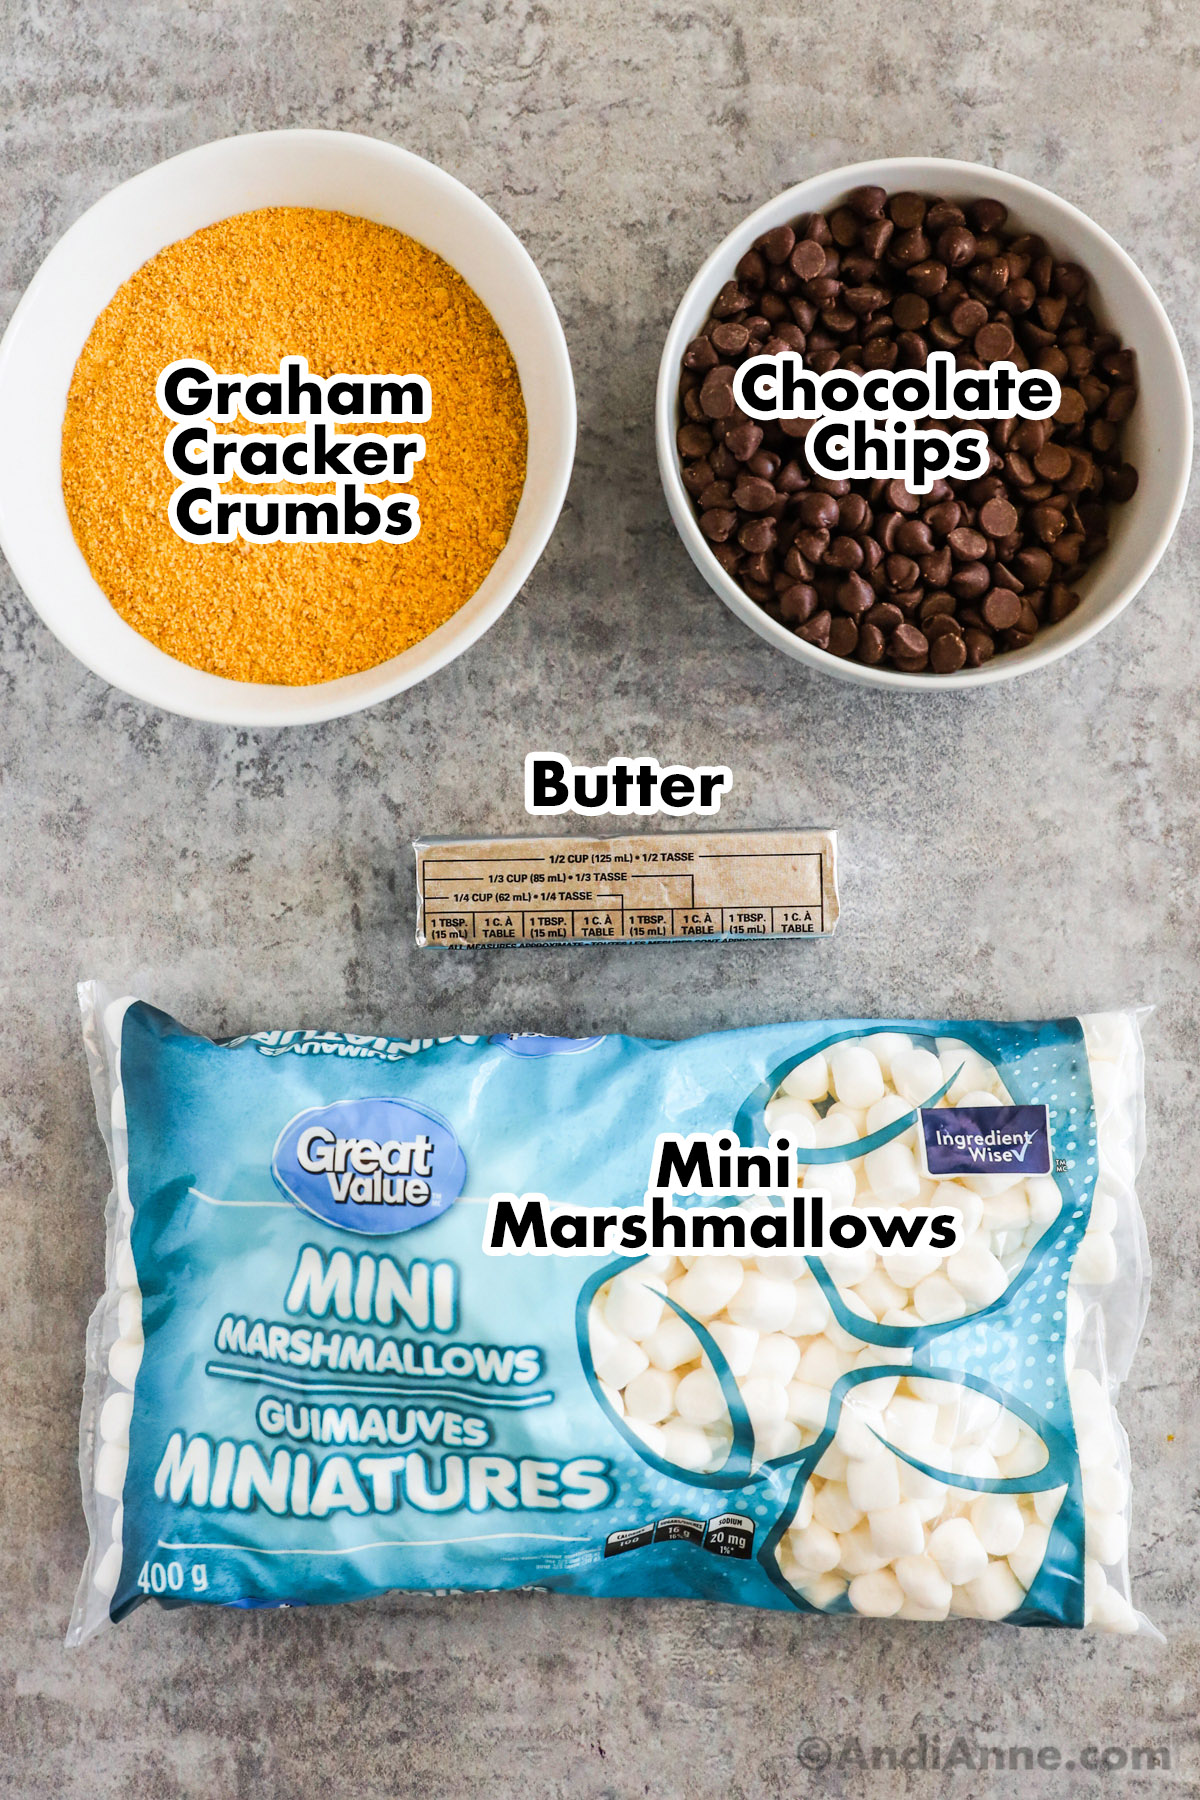 overhead view of ingredients which include: graham cracker crumbs, chocolate chips, butter and a bag of mini marshmallows.